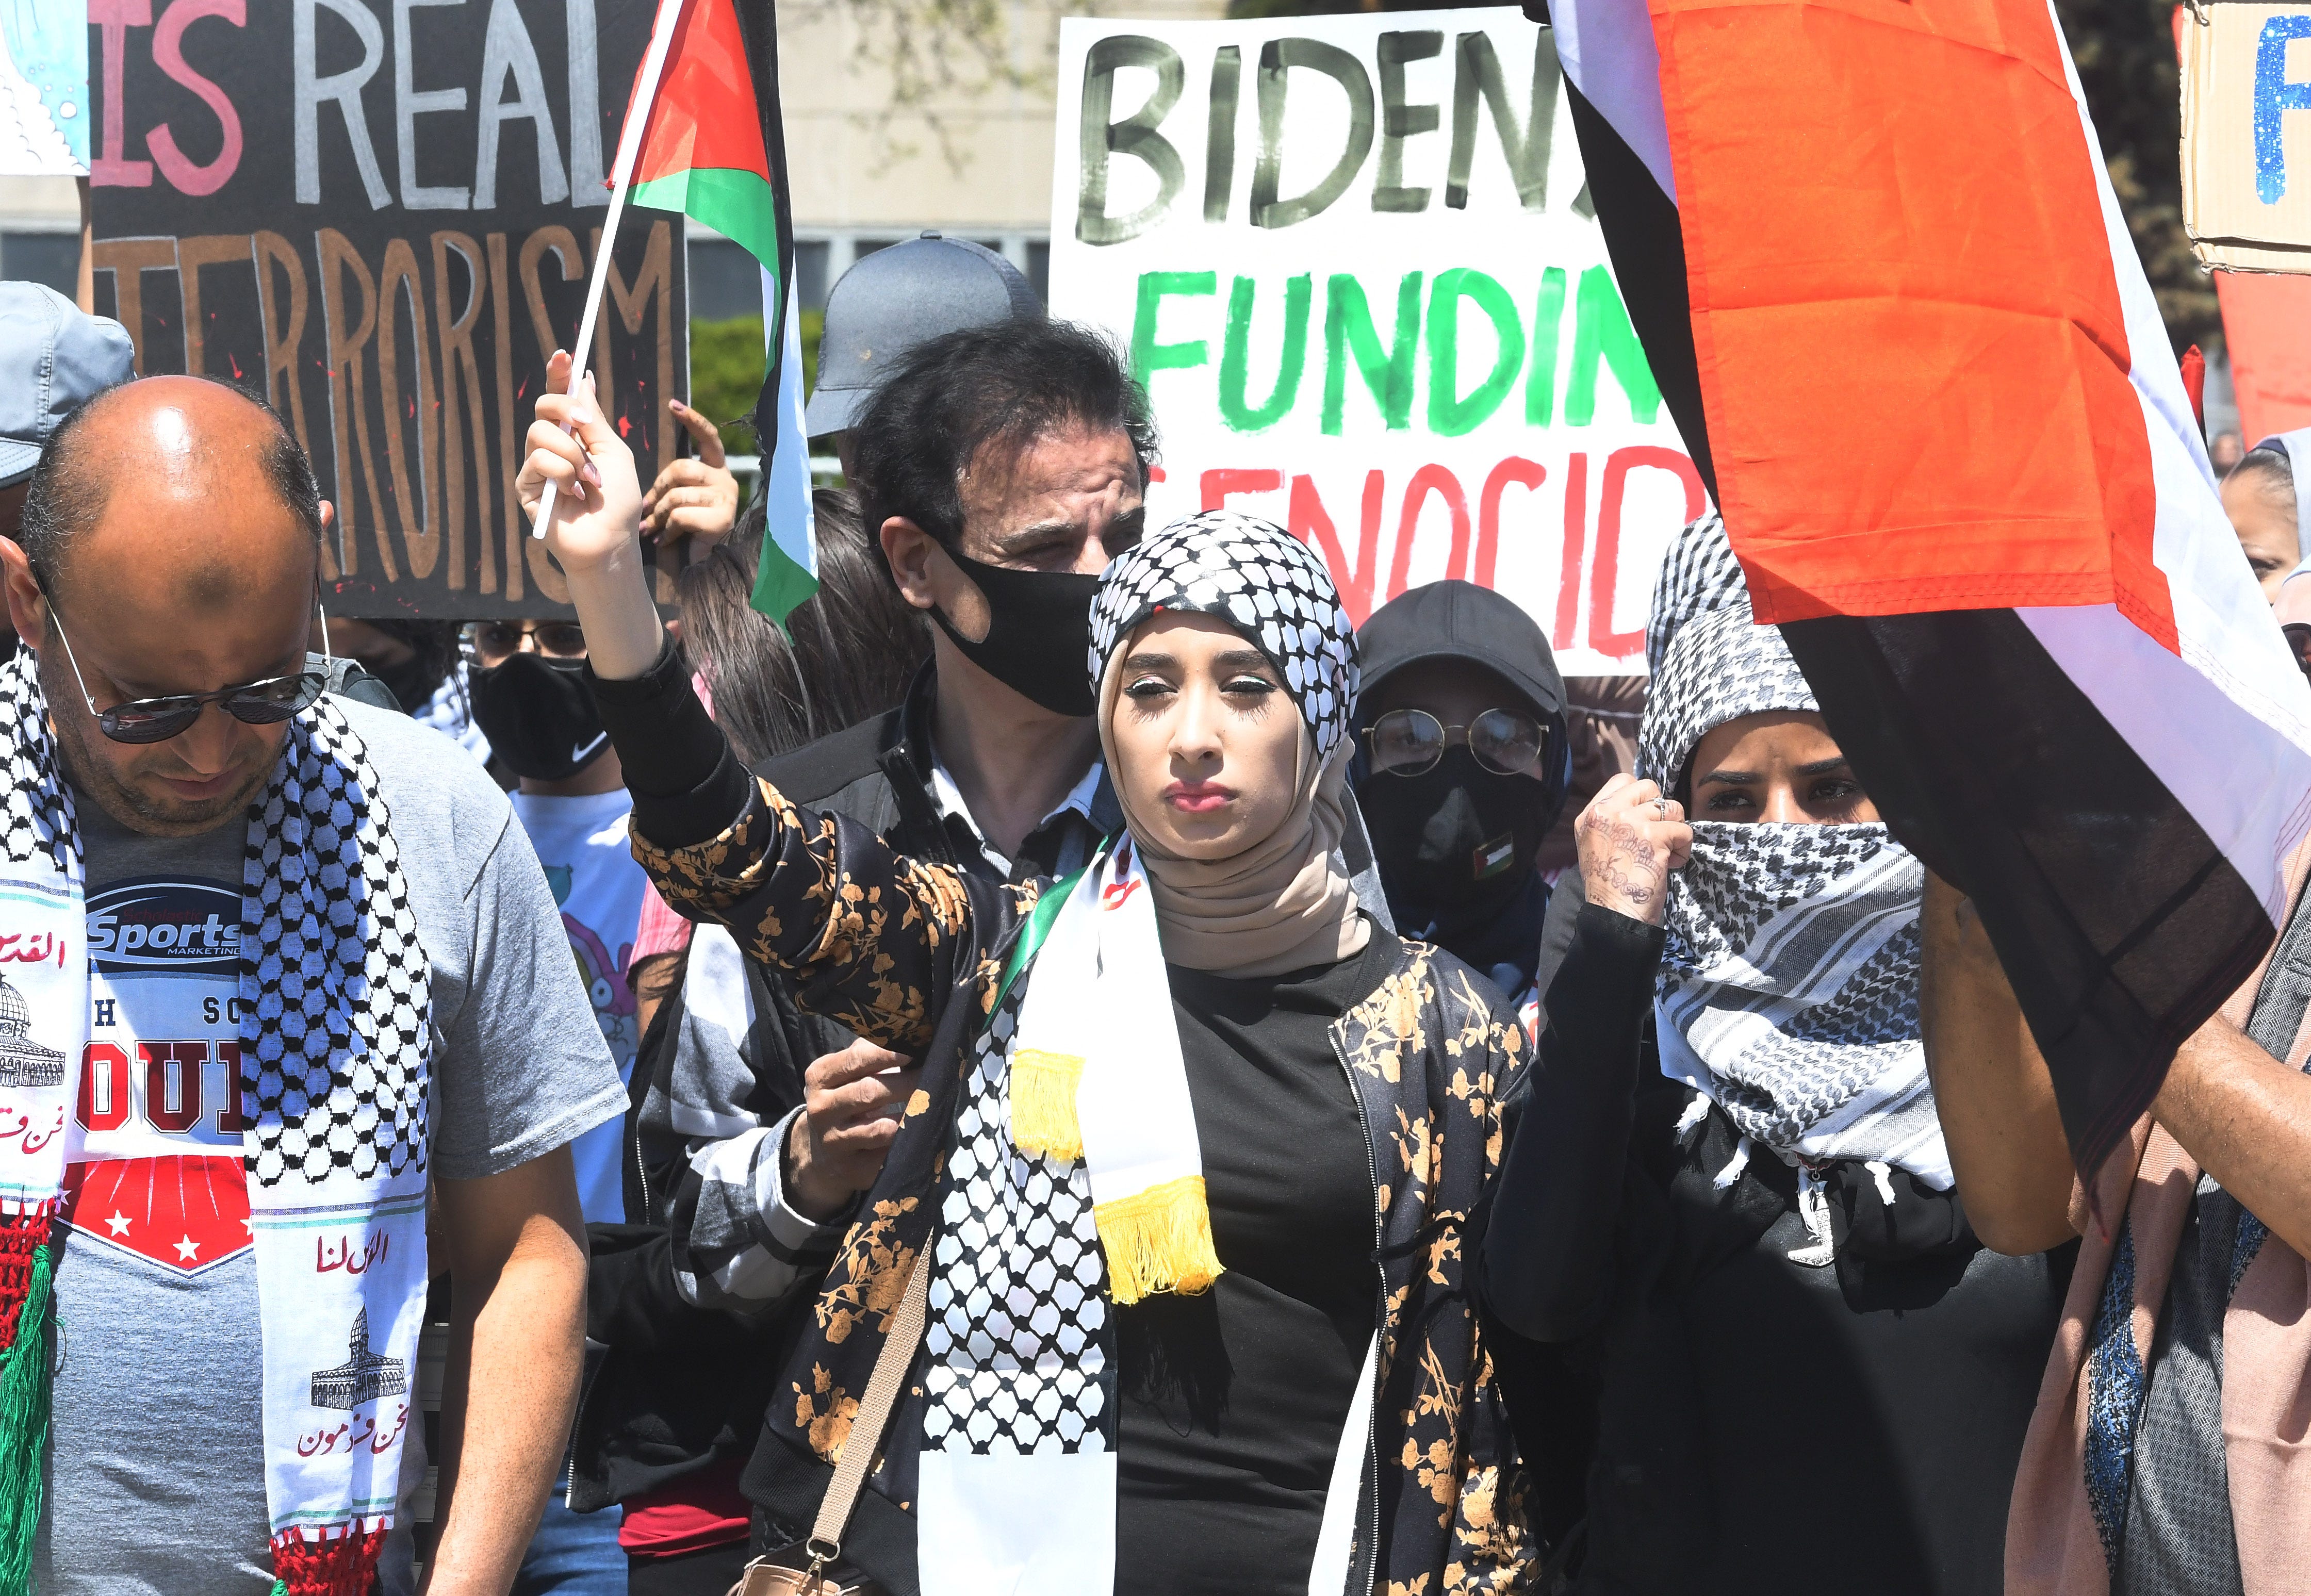 Tharwa Abdulmalik amongst thousands at a Palestinian protest and march, at the same time President Joe Biden is visiting in another part of Dearborn, Michigan on May 18, 2021.